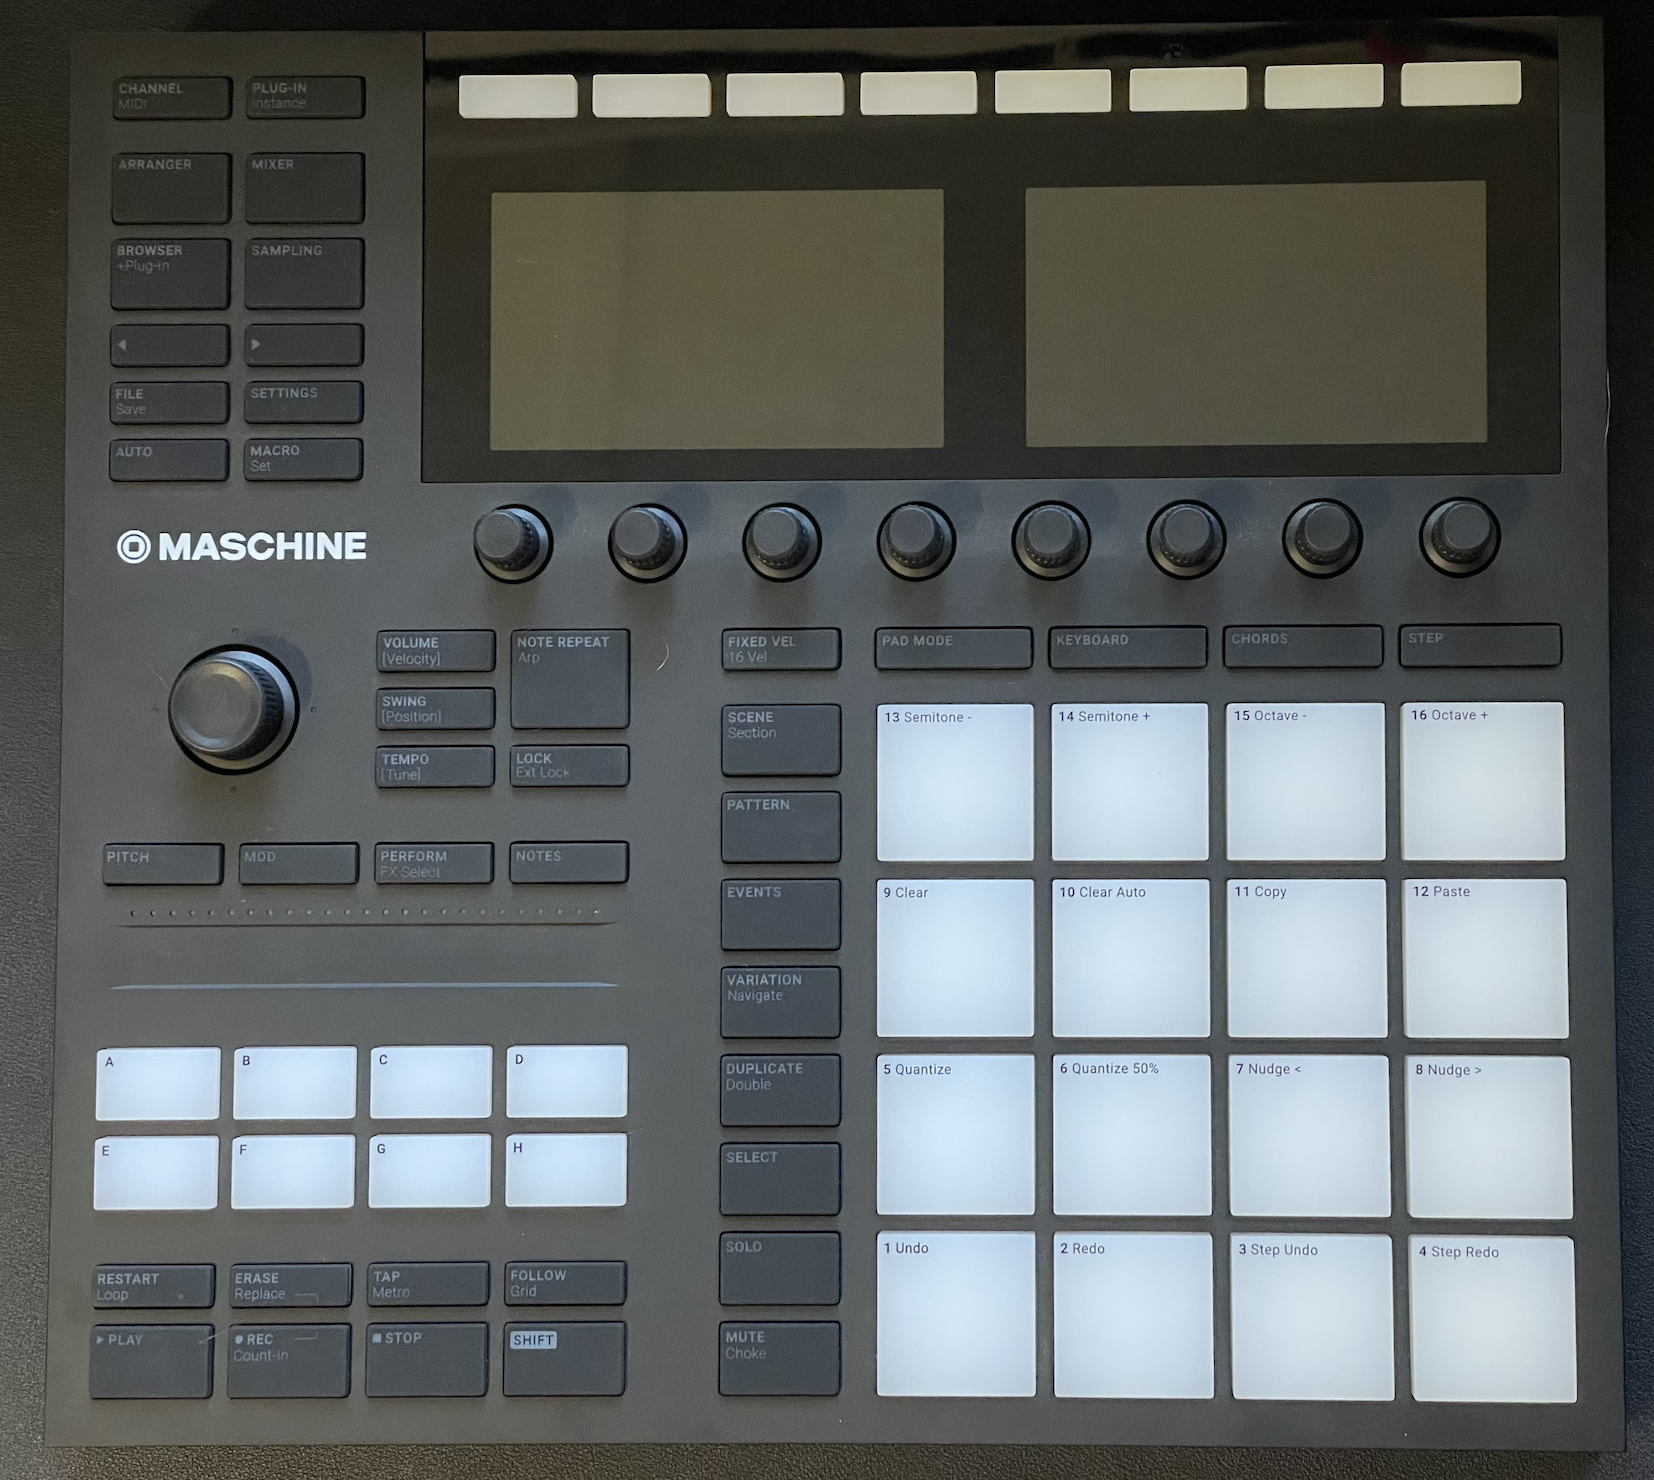 Used Native Instruments Maschine MK3 - Sweetwater's Gear Exchange